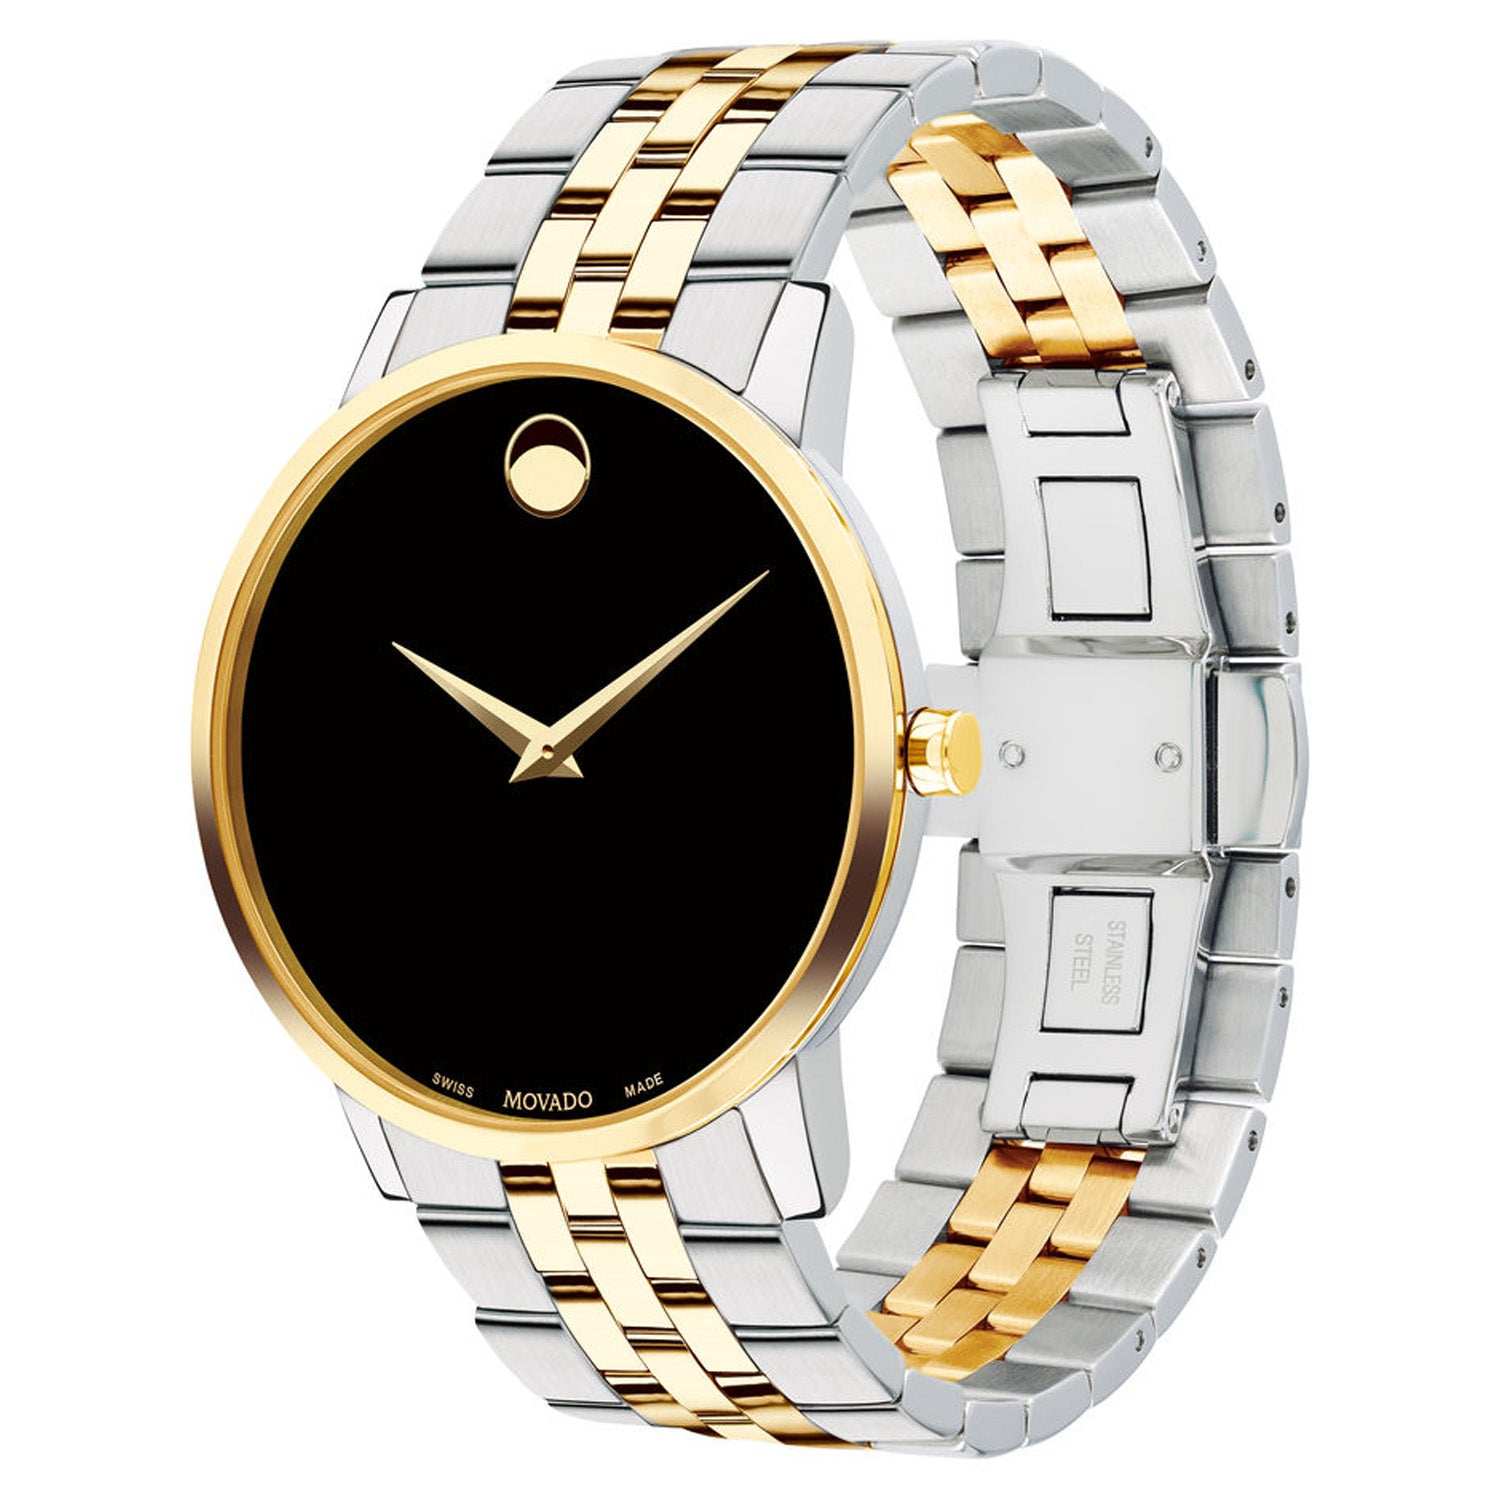 Movado Museum Classic Mens Watch with Black Dial and Stainless Steel and Yellow Gold Tone Bracelet (Swiss quartz movement)